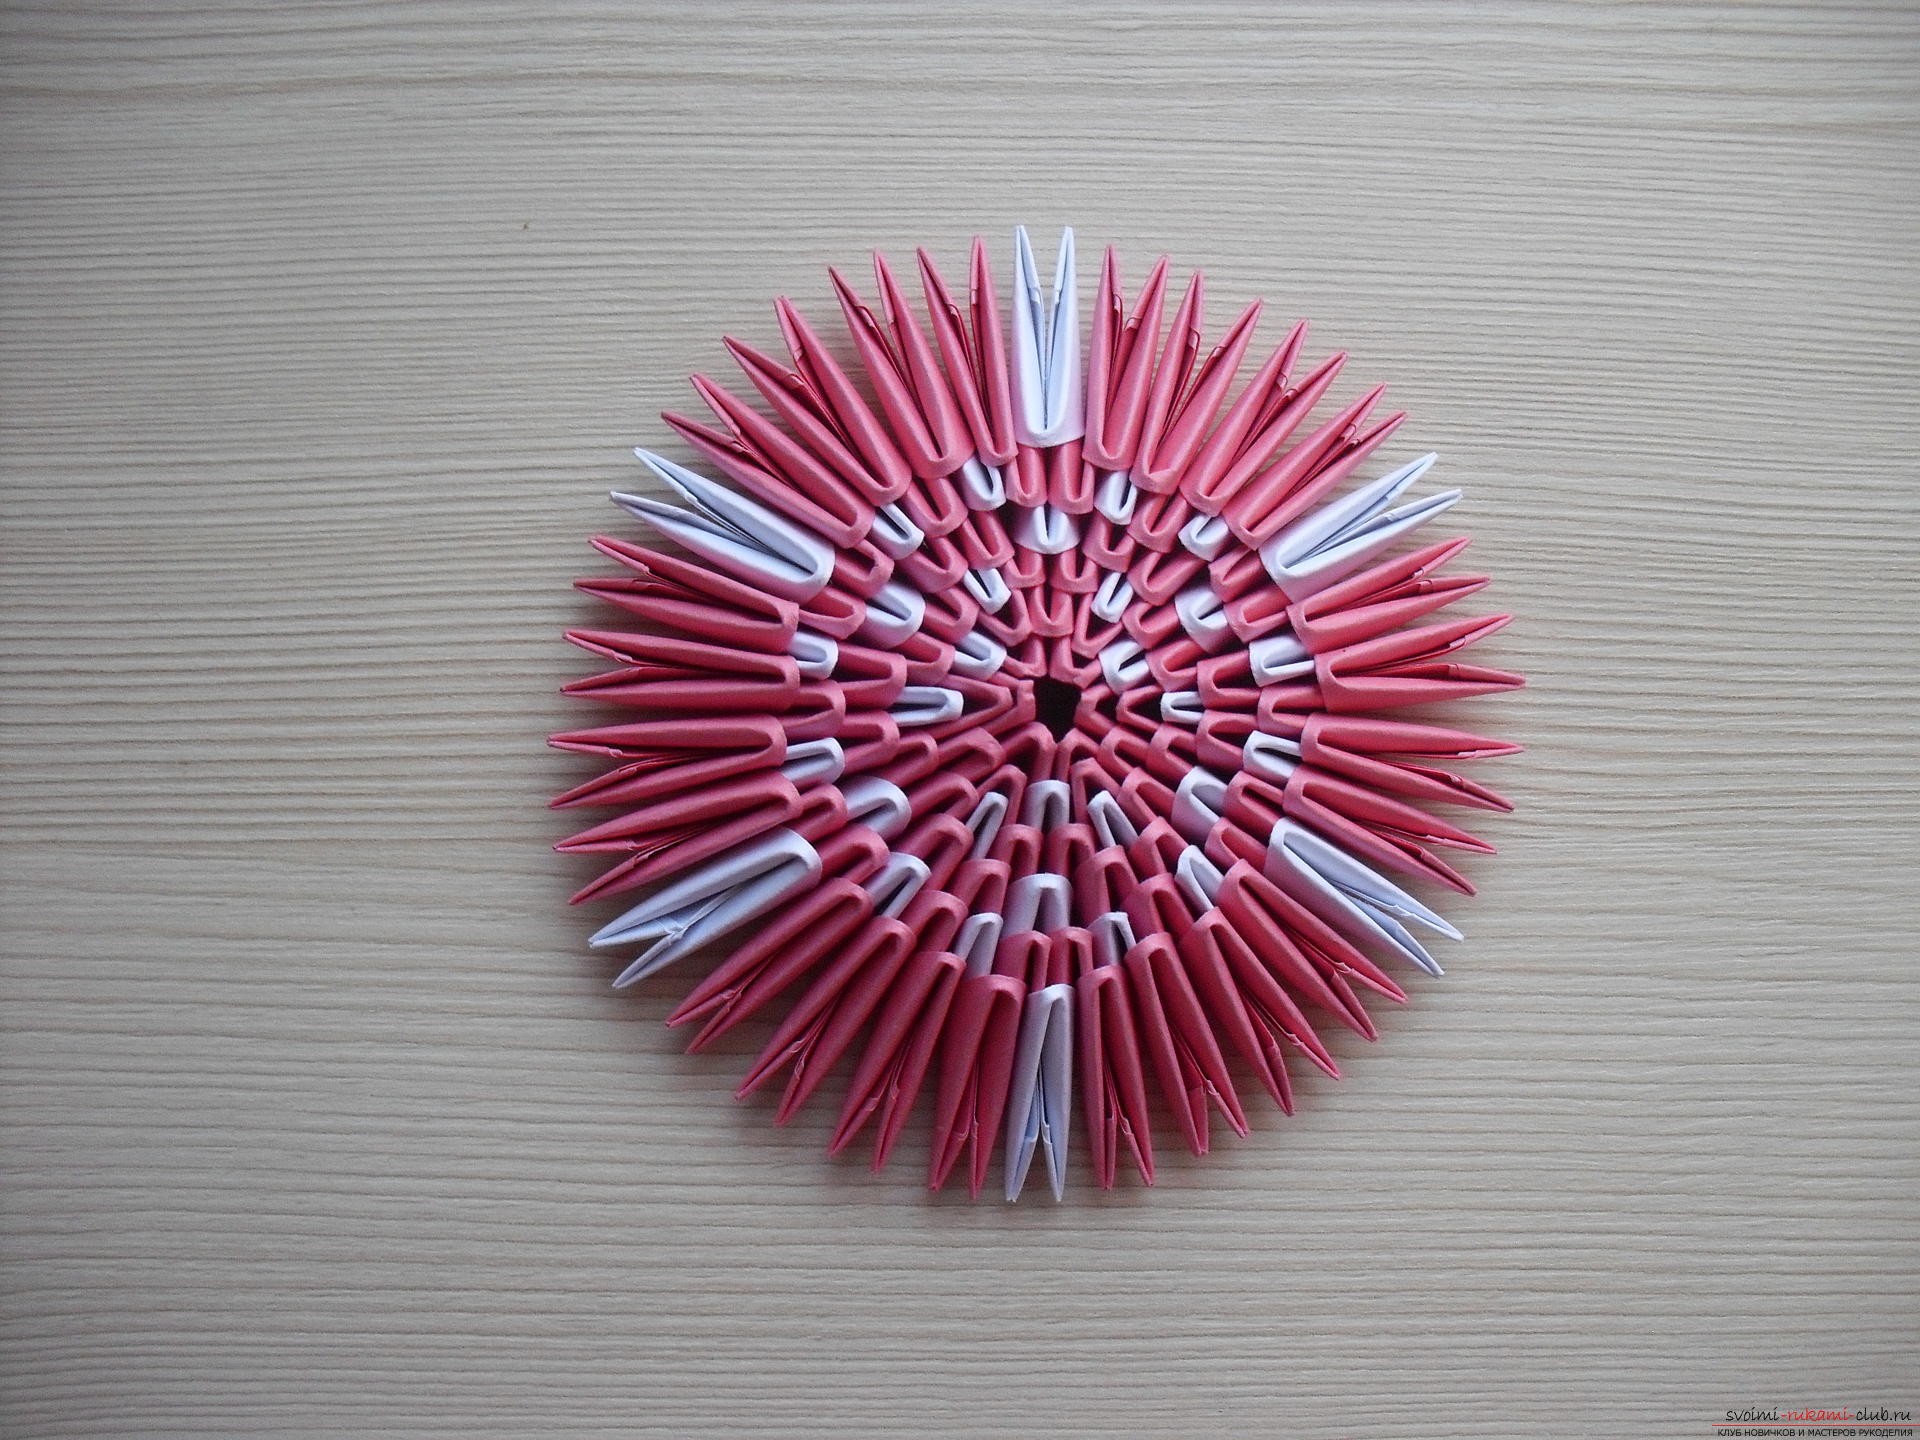 This master class will teach how to make a modular origami - a fly agaric mushroom .. Photo # 9